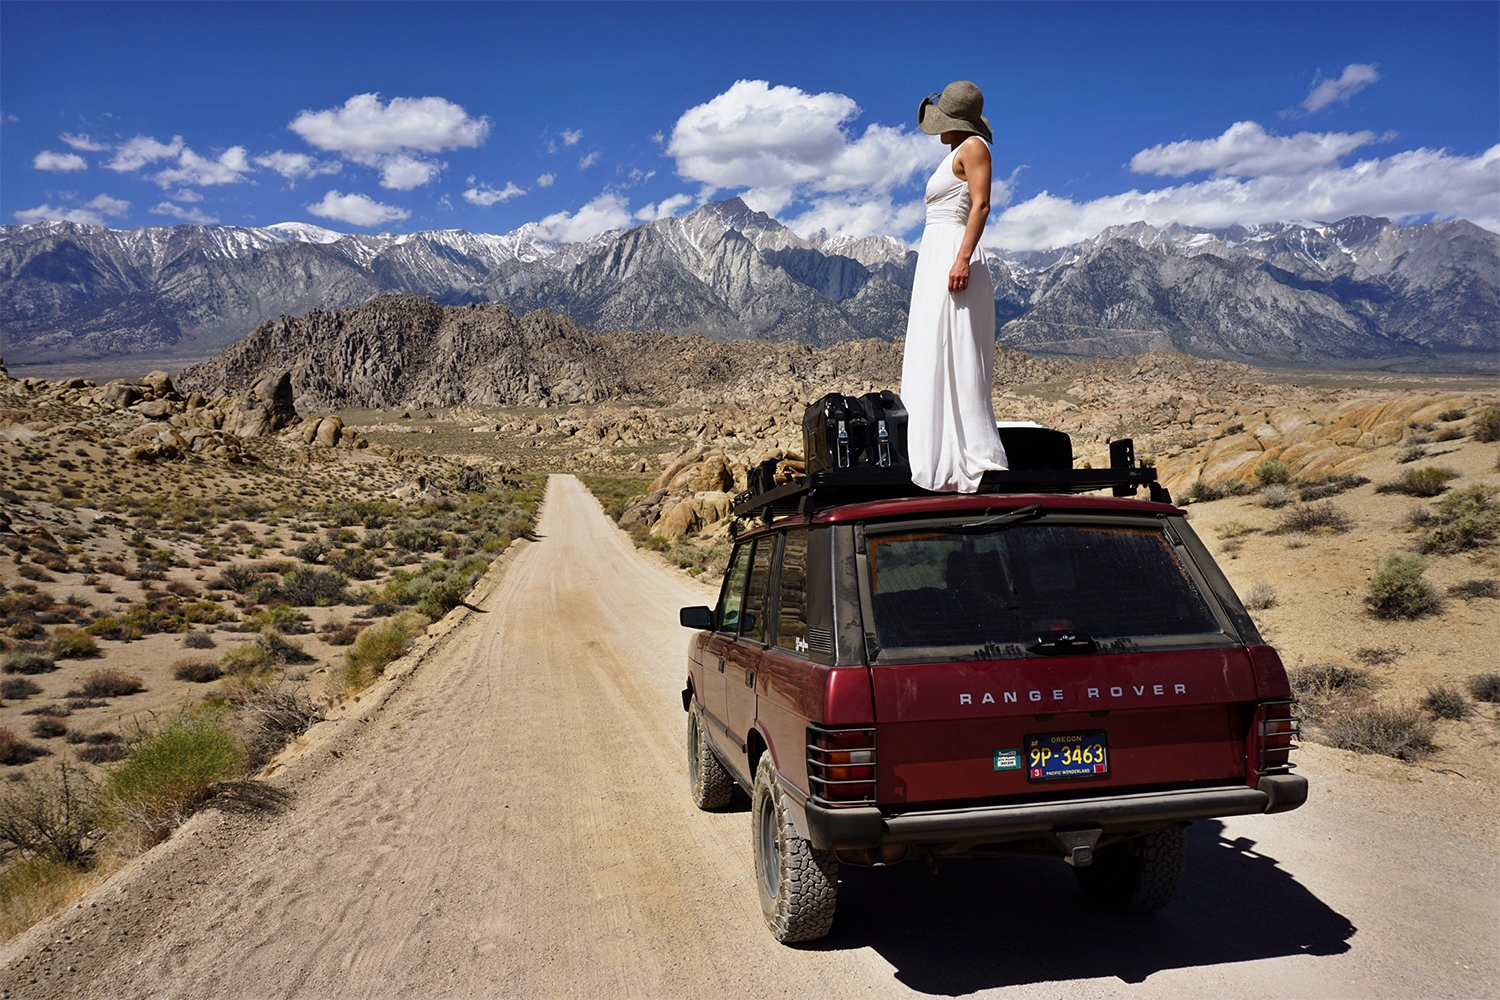 Woman in a wedding dress standing on a red 1991 Range Rover Classic SUV